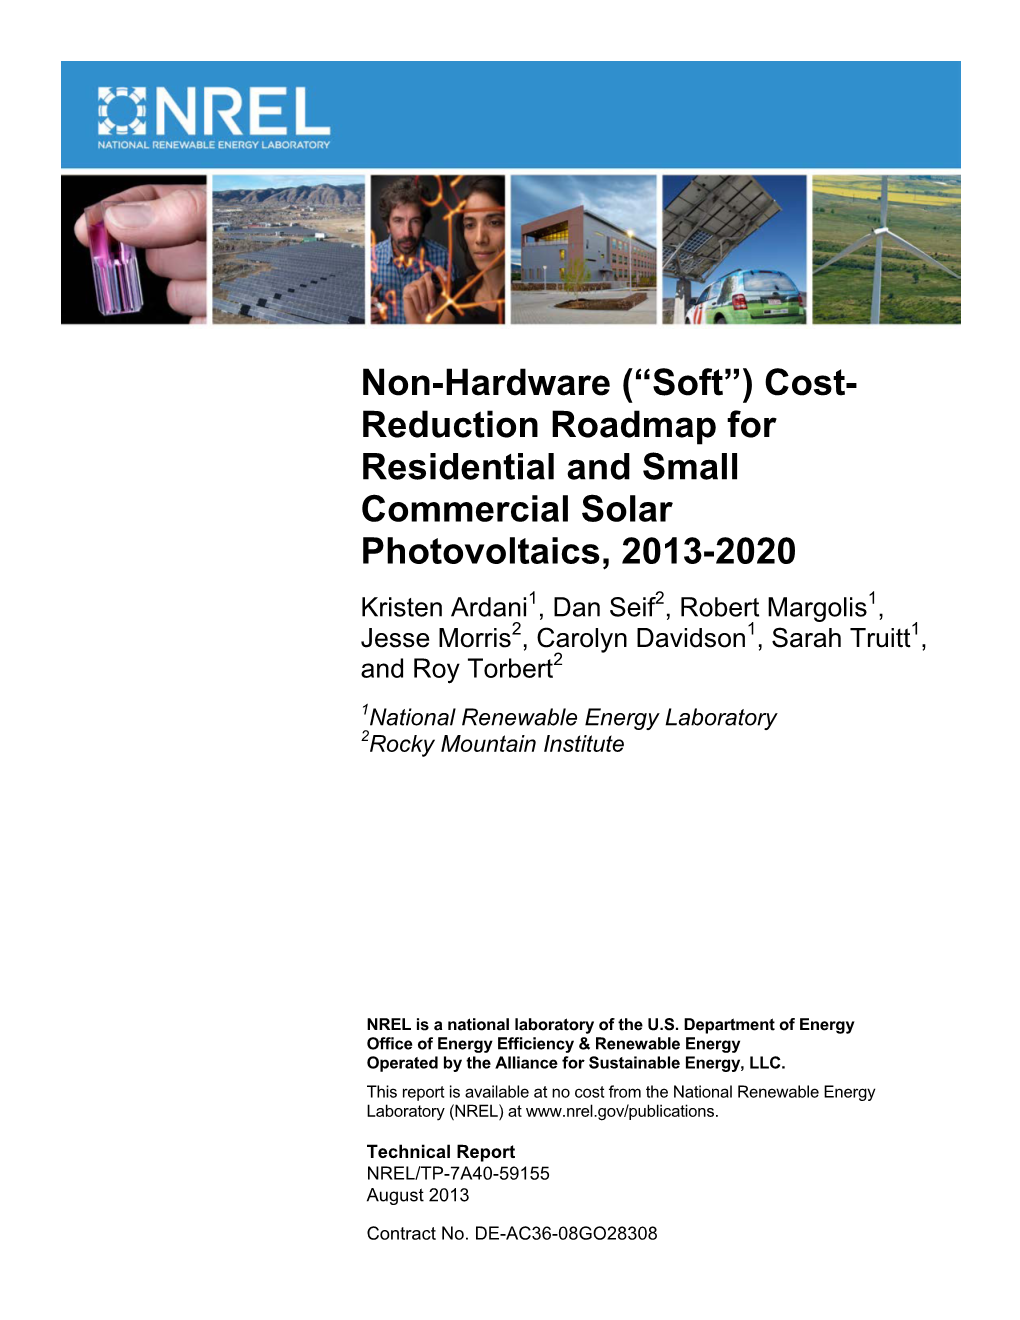 (“Soft”) Cost-Reduction Roadmap for Residential and Small Commercial